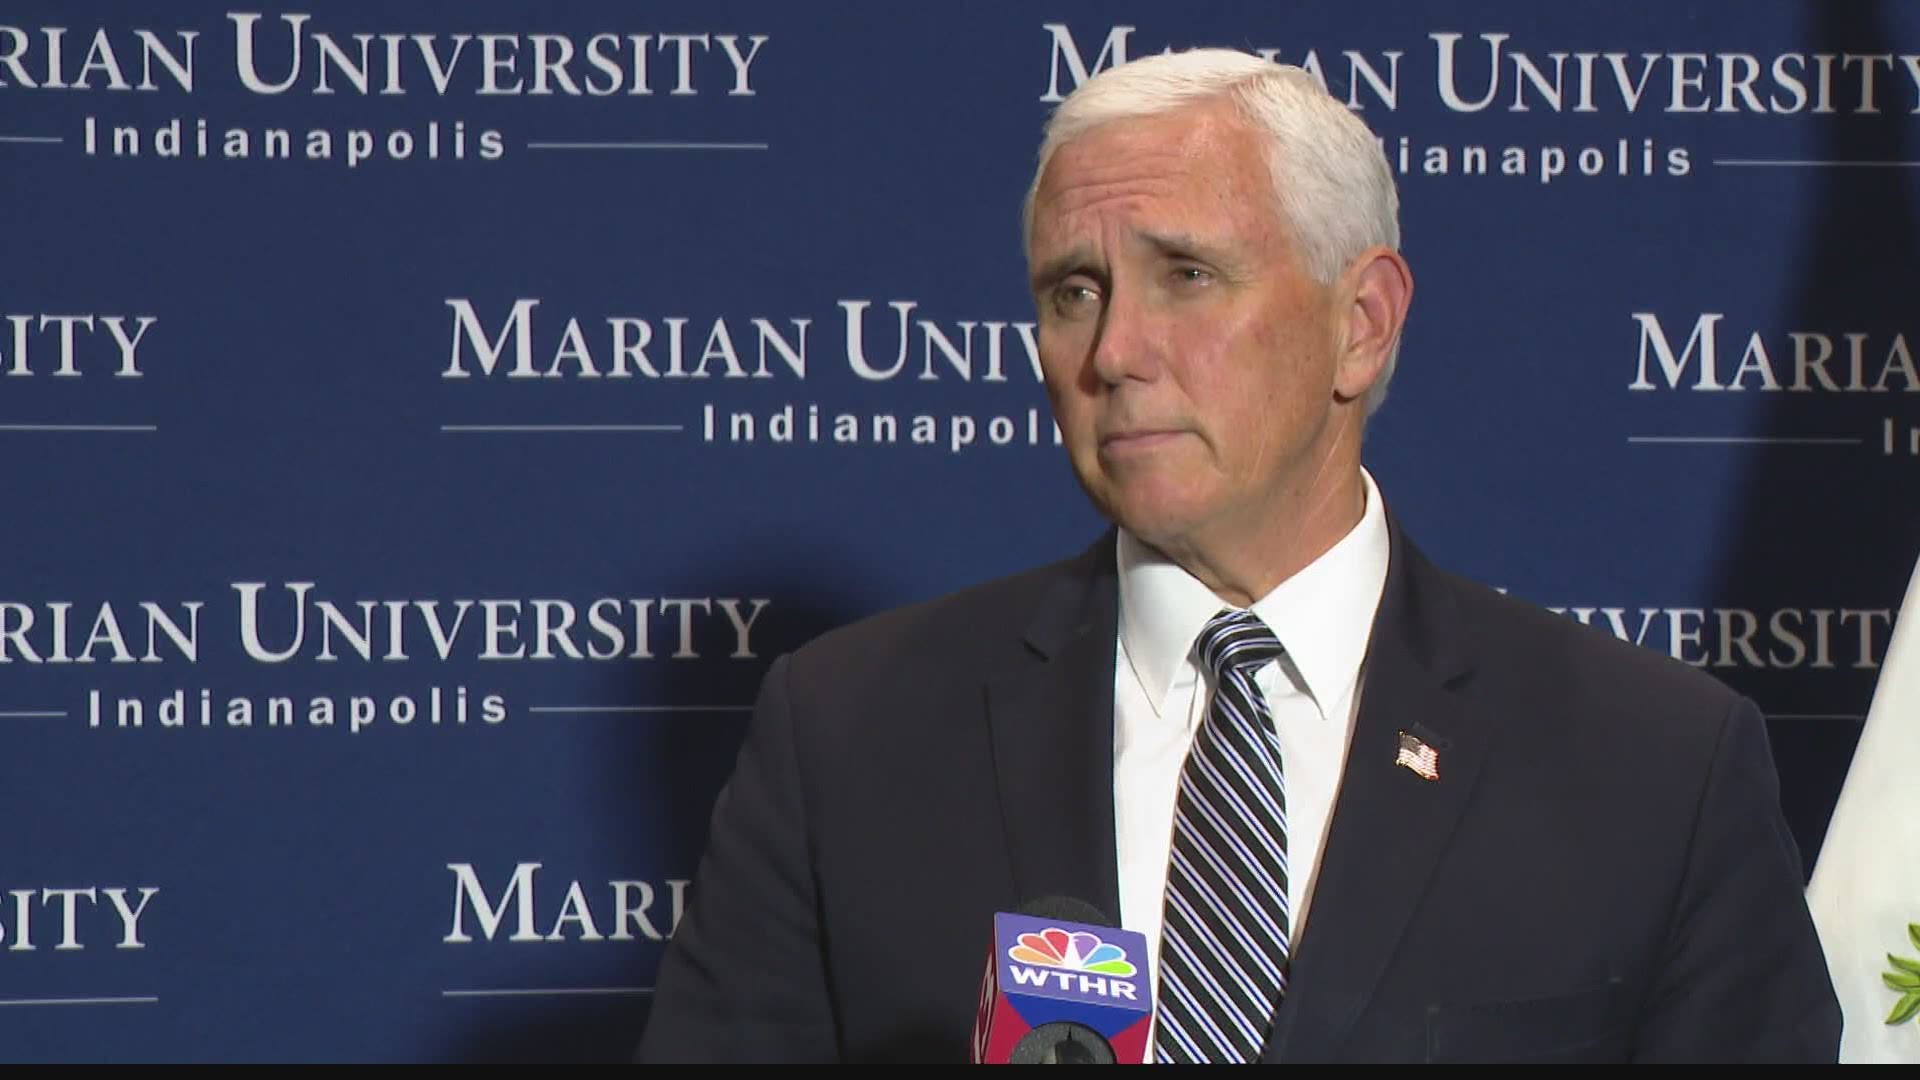 In an exclusive interview with 13News, Vice President Mike Pence discussed the impact of coronavirus in Indiana.